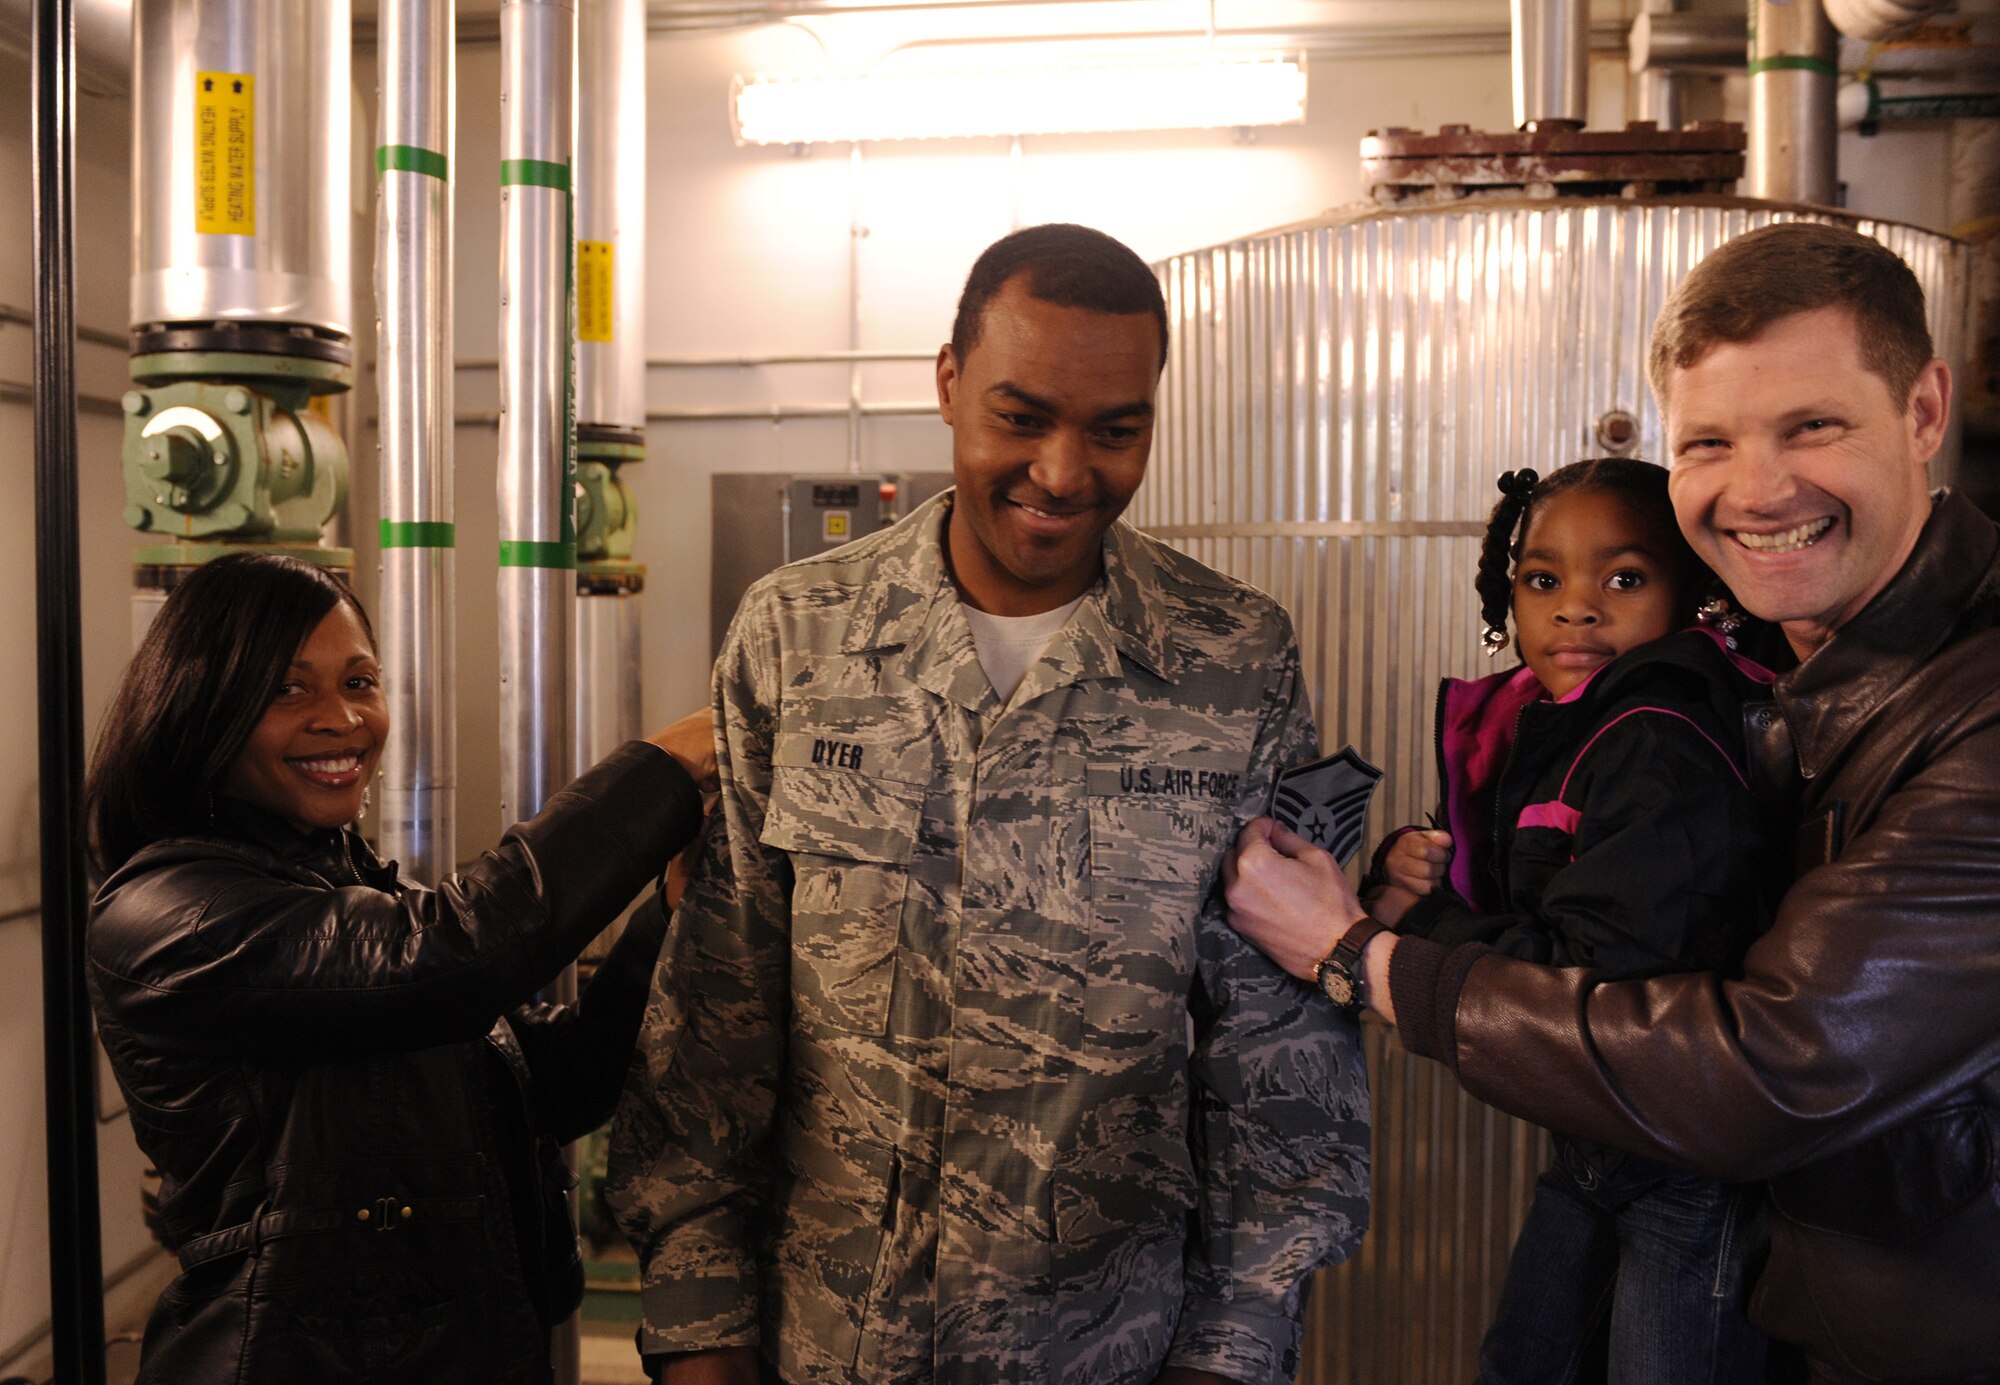 MOODY AIR FORCE BASE, Ga. -- Tech. Sgt. Alvin Dyer, 23rd Civil Engineering Squadron heating, ventilation and air conditioning NCO in-charge, stands while his wife, Tanquer, daughter, Cassidy, and Col. Gary Henderson, 23rd Wing commander, pin on his chevrons during his promotion to master sergeant here Dec. 29. Sergeant Dyer was promoted under the Stripes for Exceptional Performers program. (U.S. Air Force photo by Airman 1st Class Benjamin Wiseman)